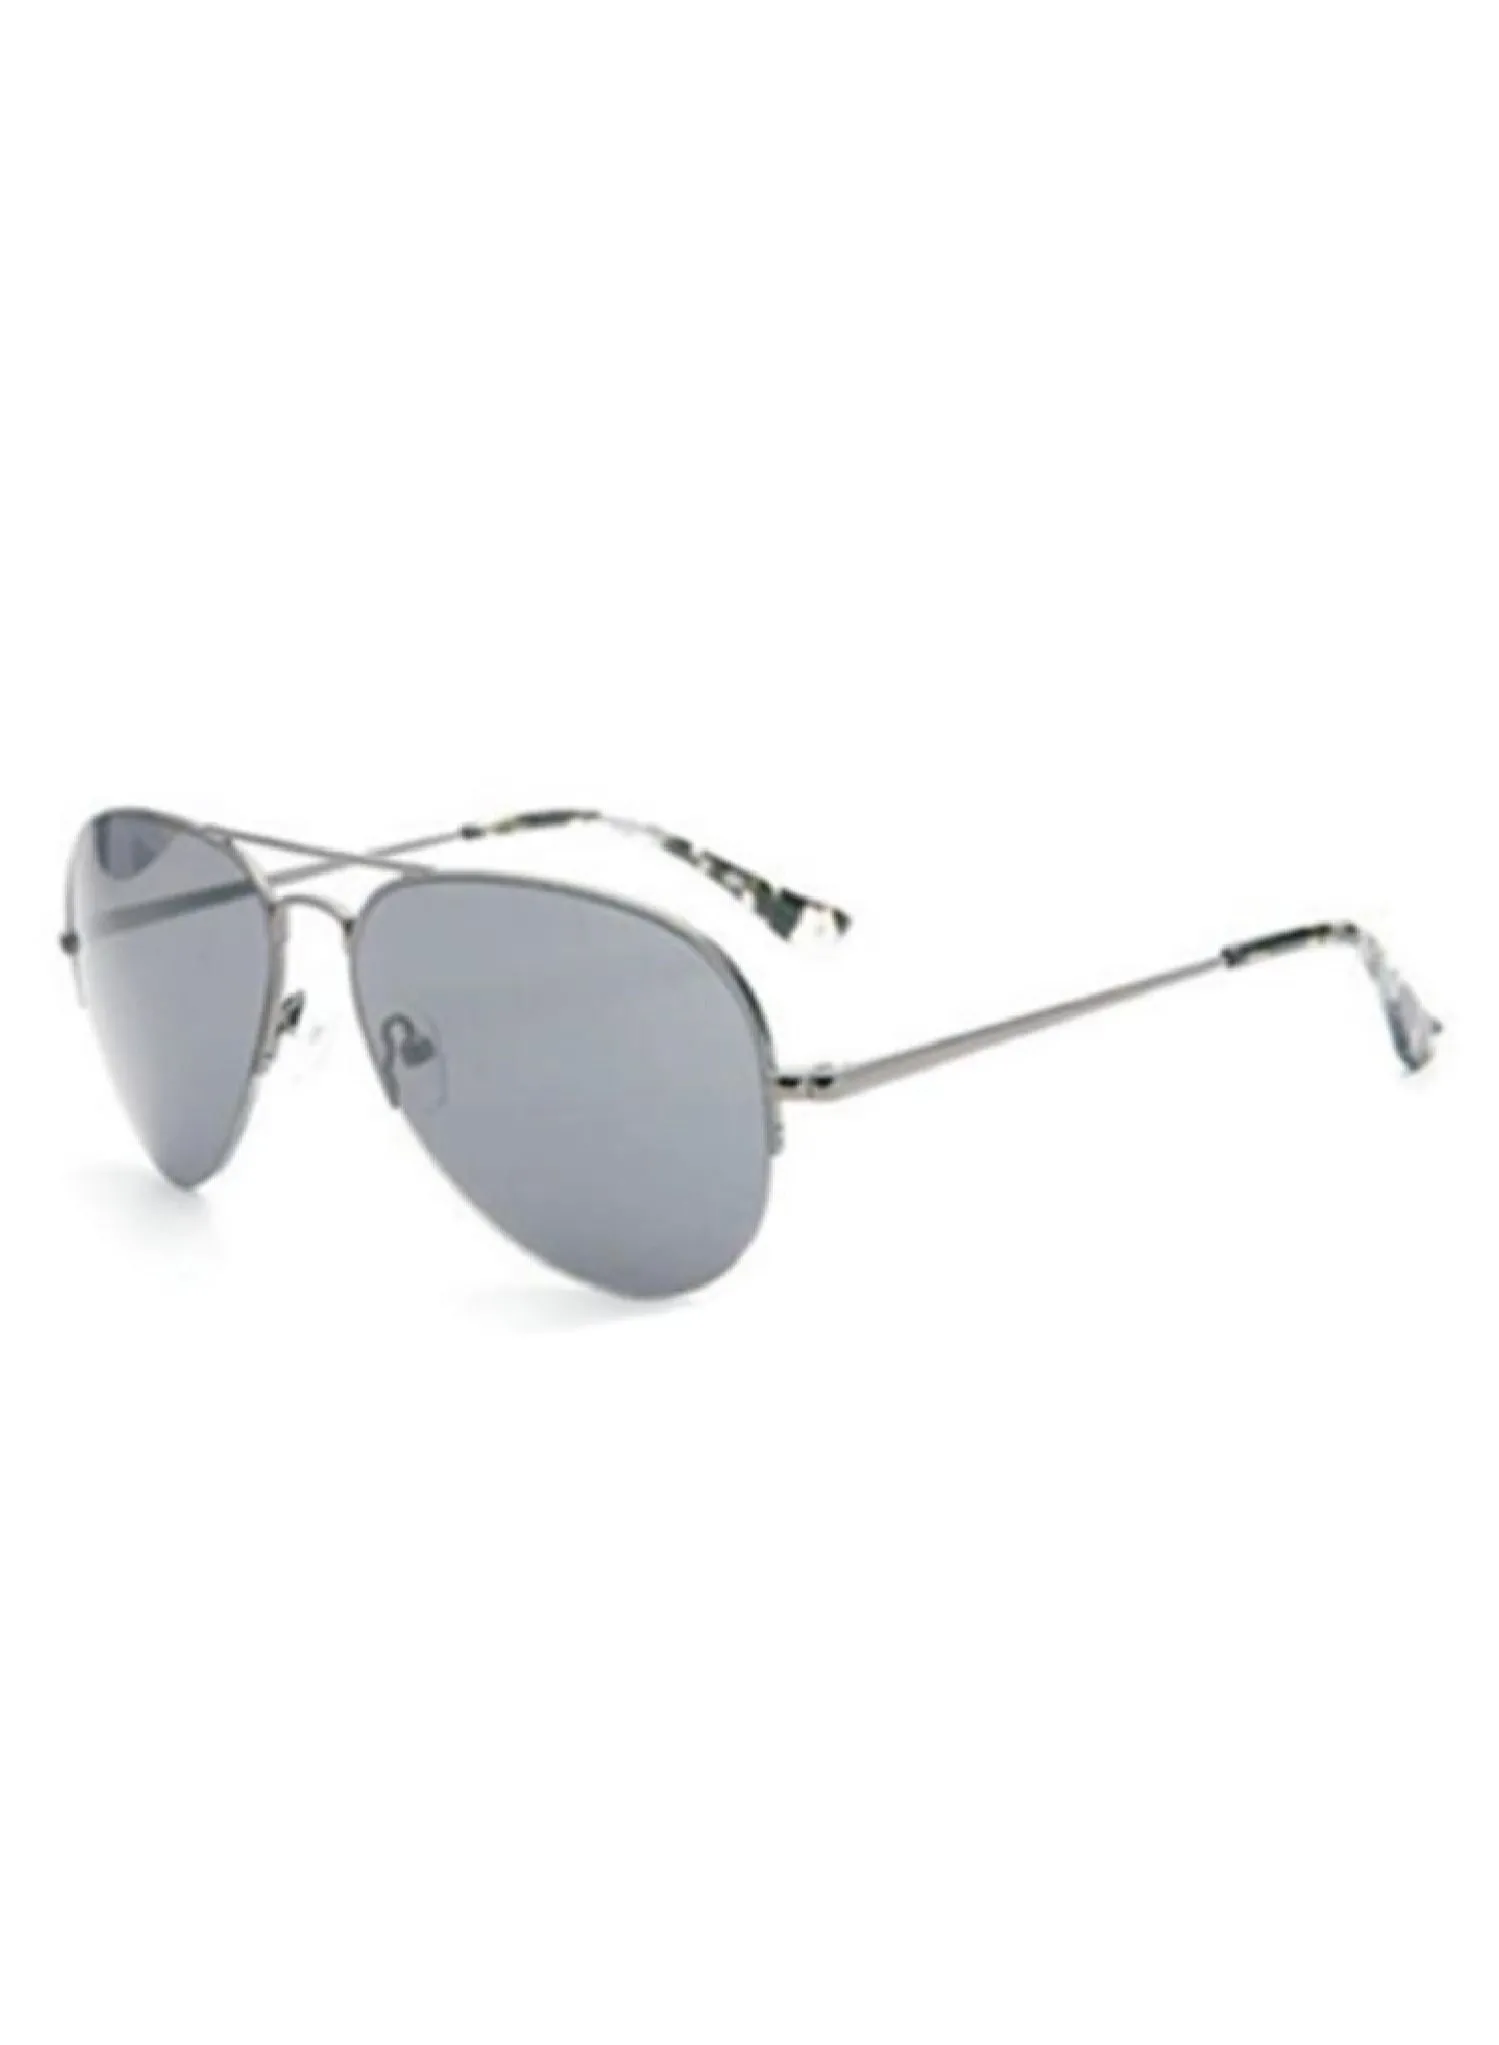 LAOONT Aviator Frame Sunglasses with Polarized Lenses for Men with A New Design